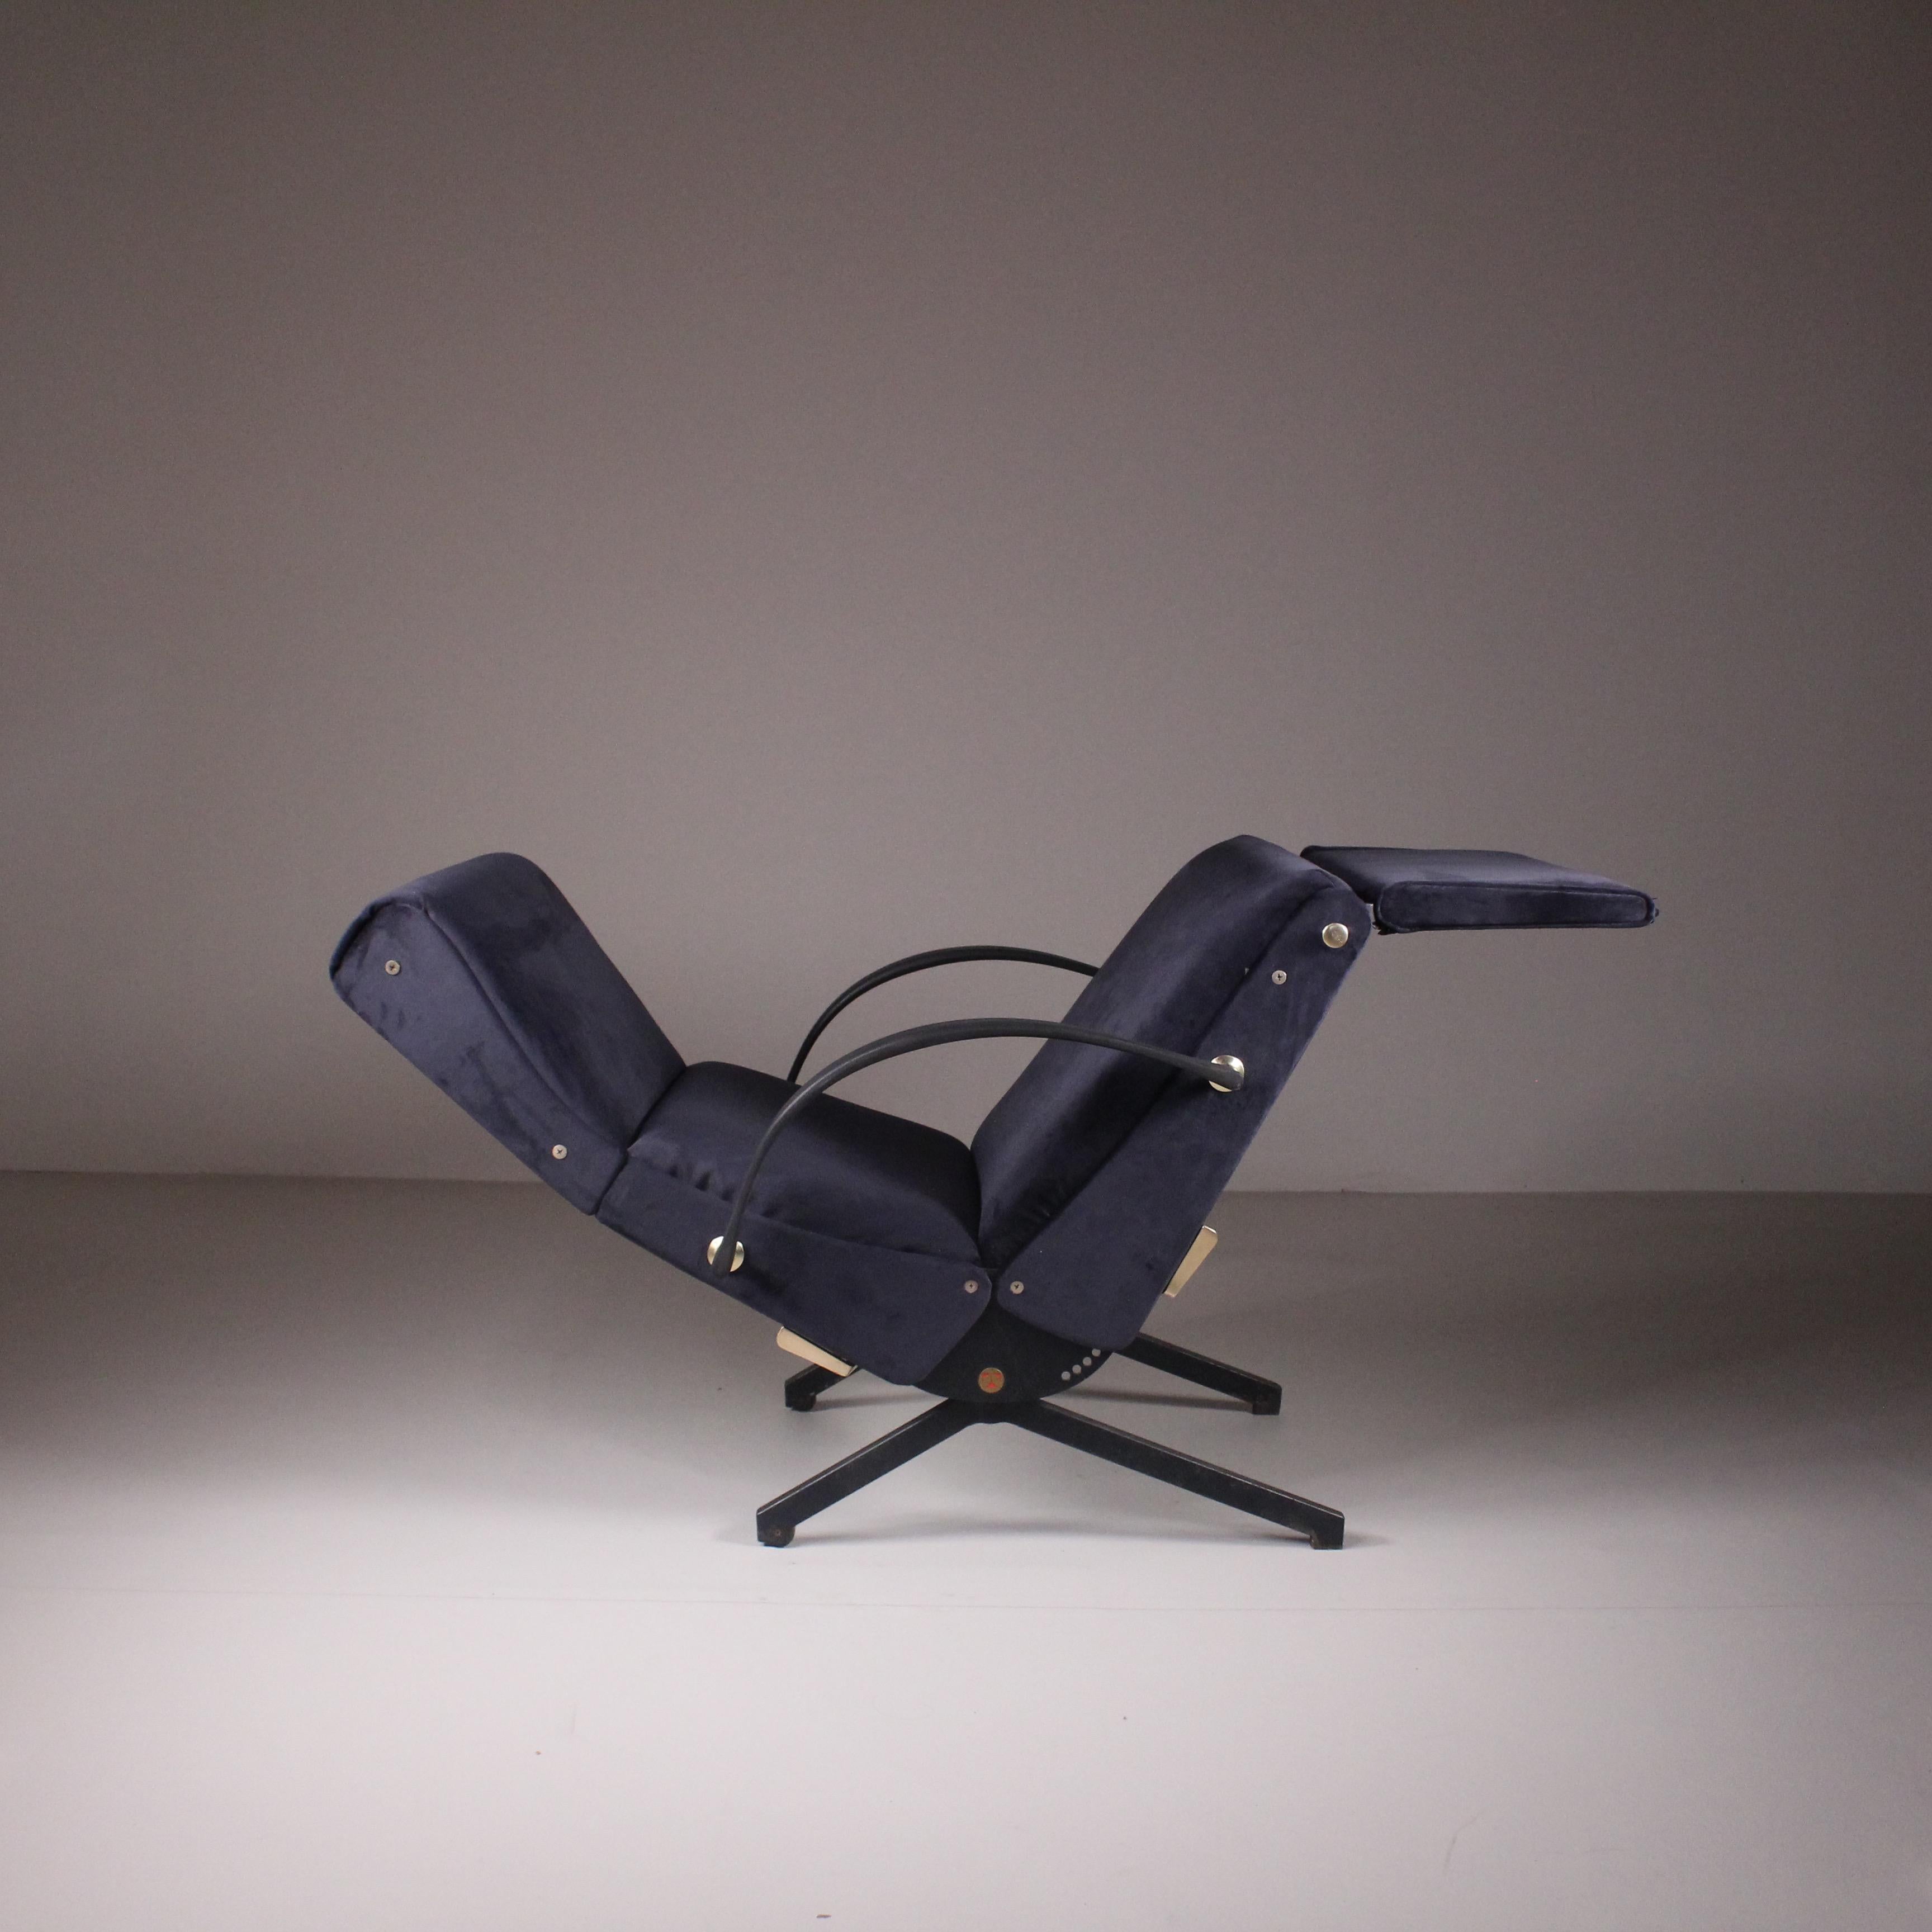 Armchair P40, Osvaldo Borsani, Tecno, 1950s. An innovative armchair by Osvaldo Borsani, equipped with advanced technology to maximize the possibilities of the classic chaise longue. Tecno faced the challenge of creating a compact but flexible